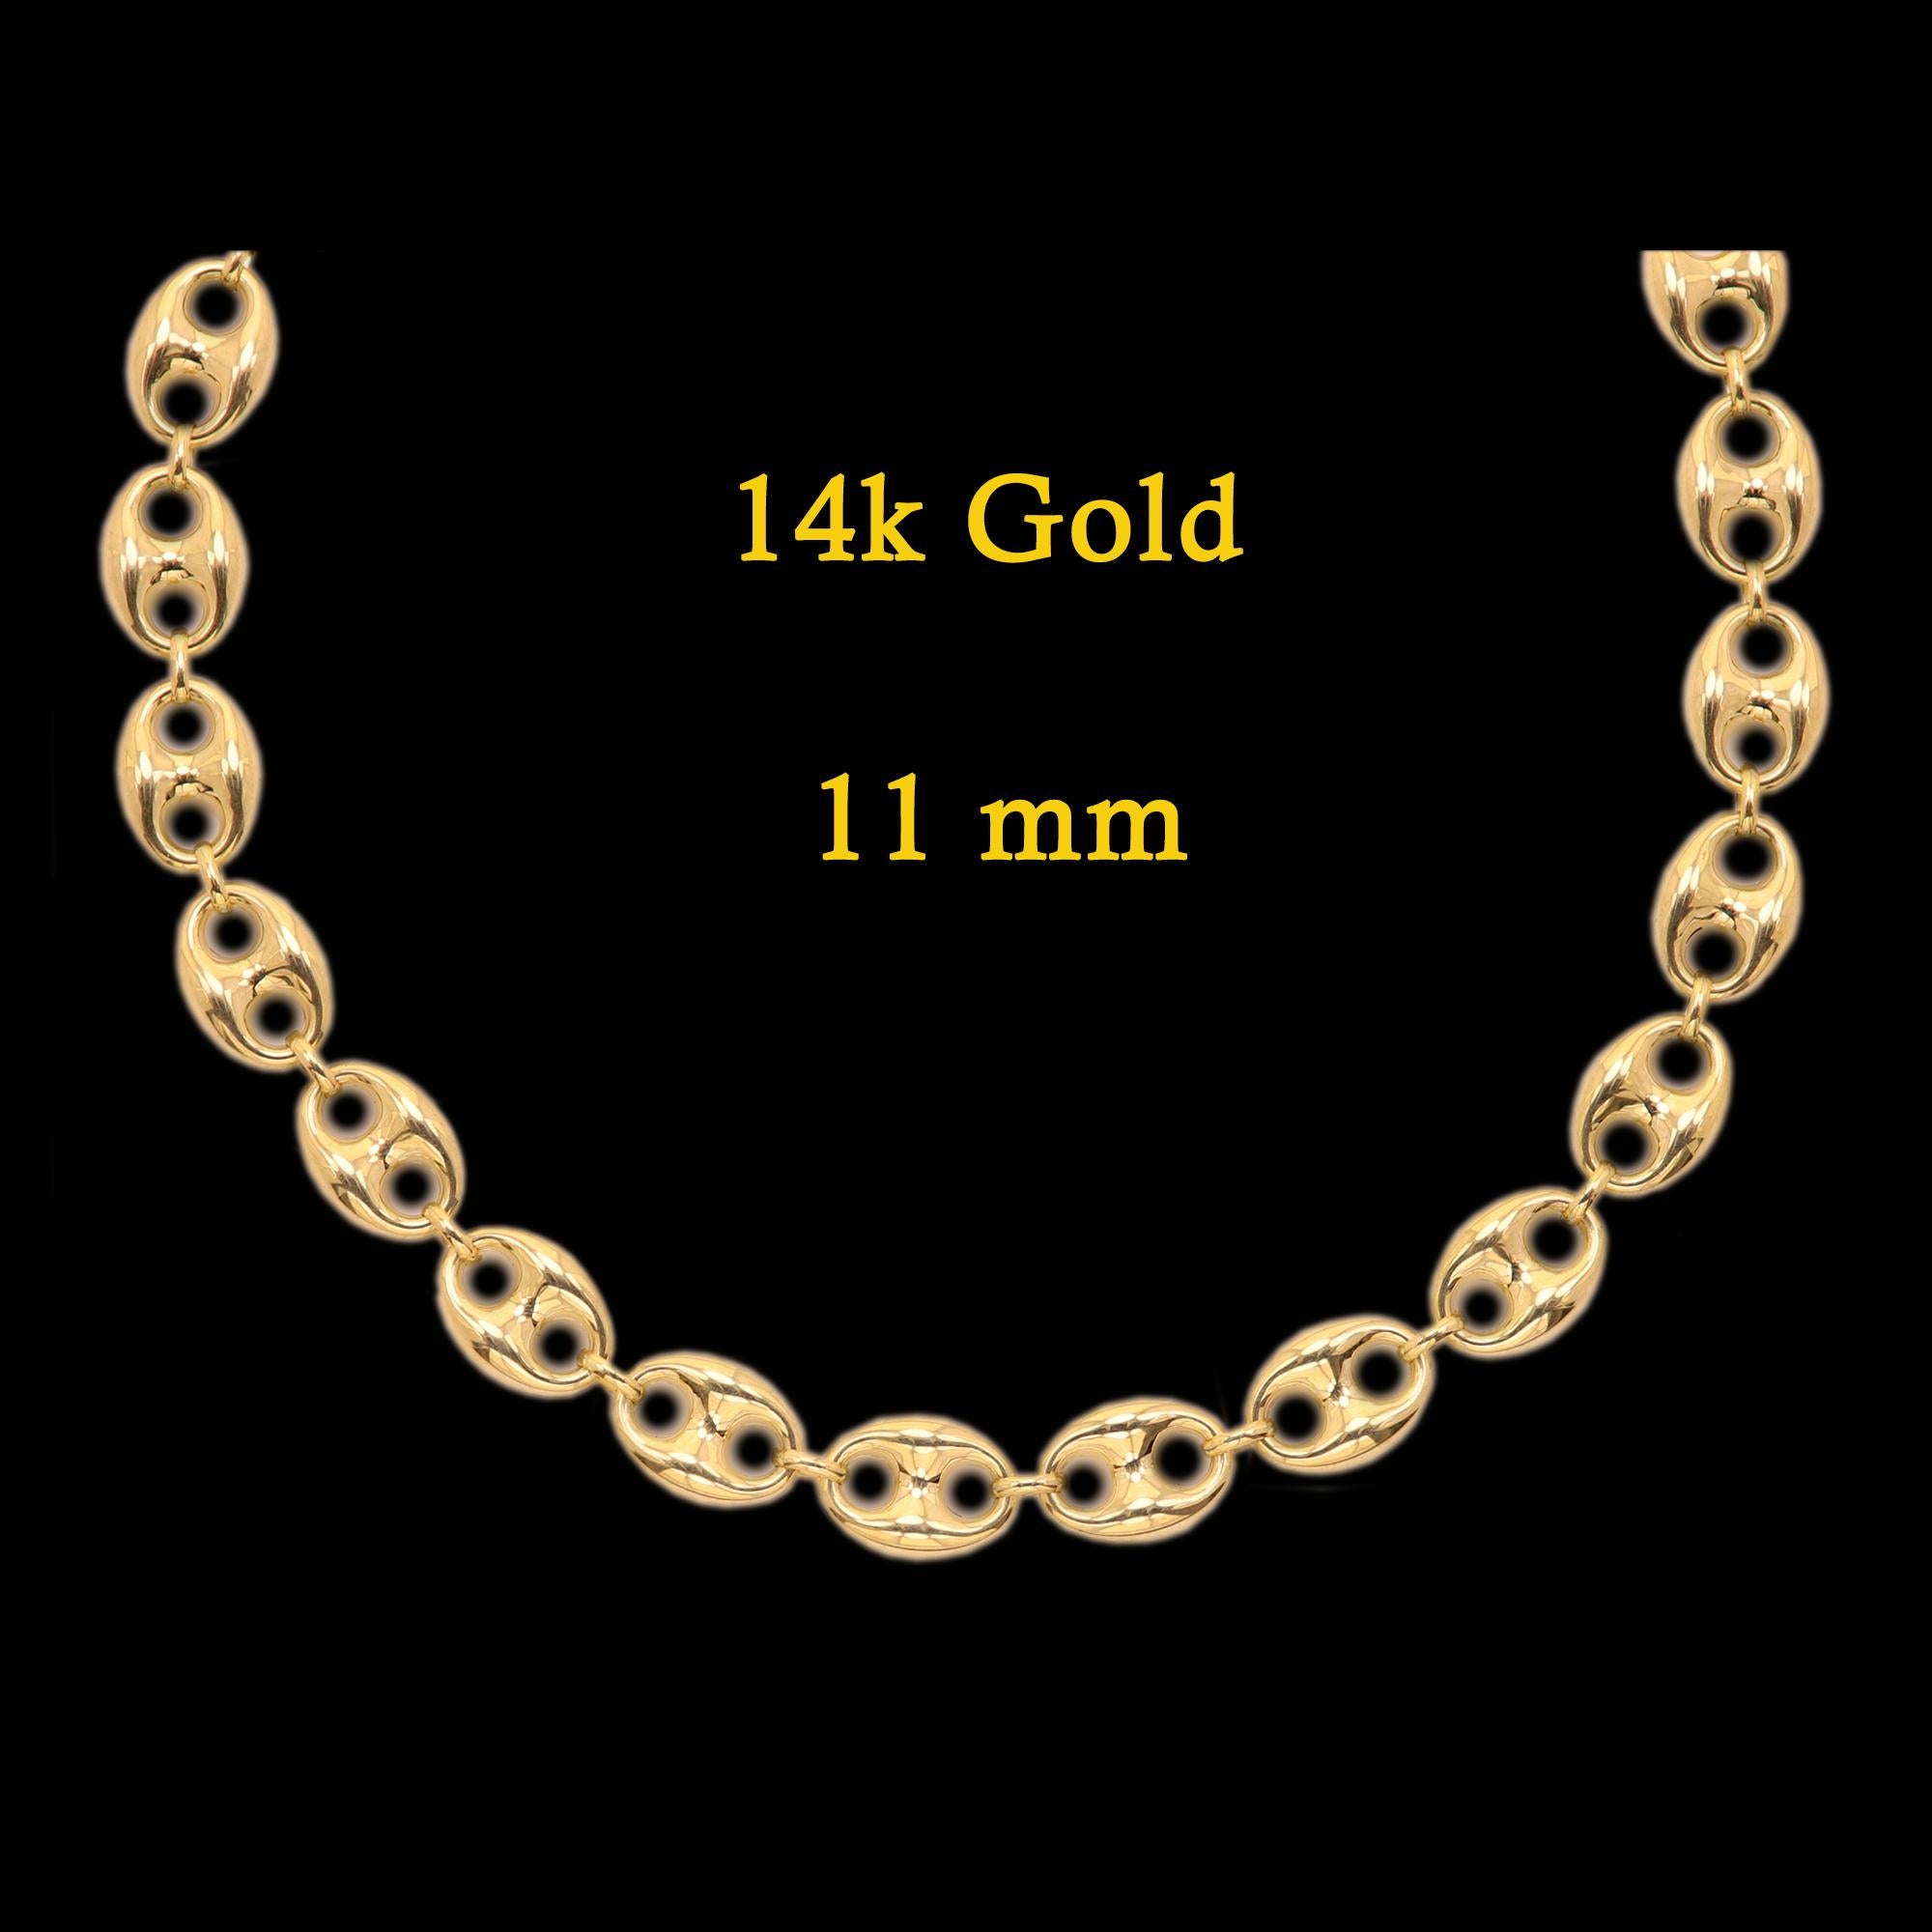 Puffed Anchor Italian Gold Necklace Chain Mariner Link Chain Solid 14 Karat Gold 2